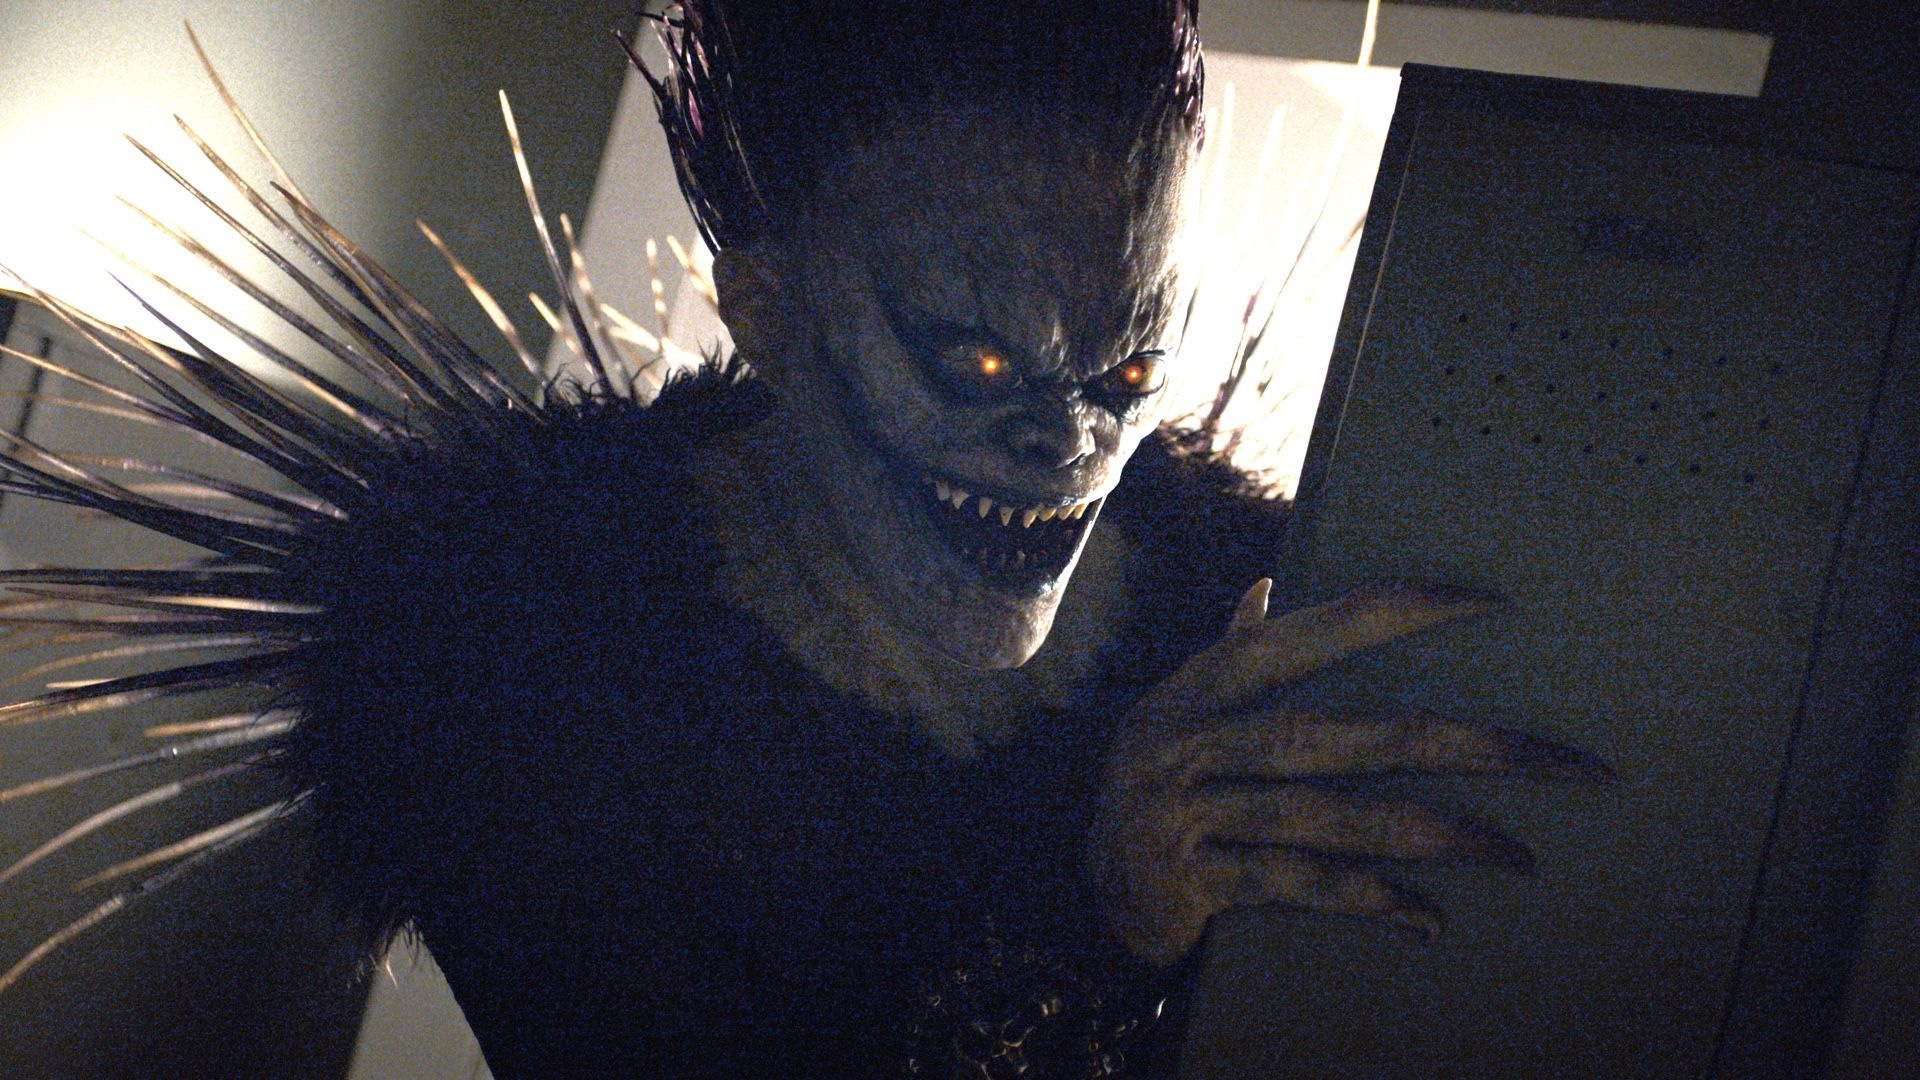 We're optimistic about the Duffer brothers' new Death Note Netflix